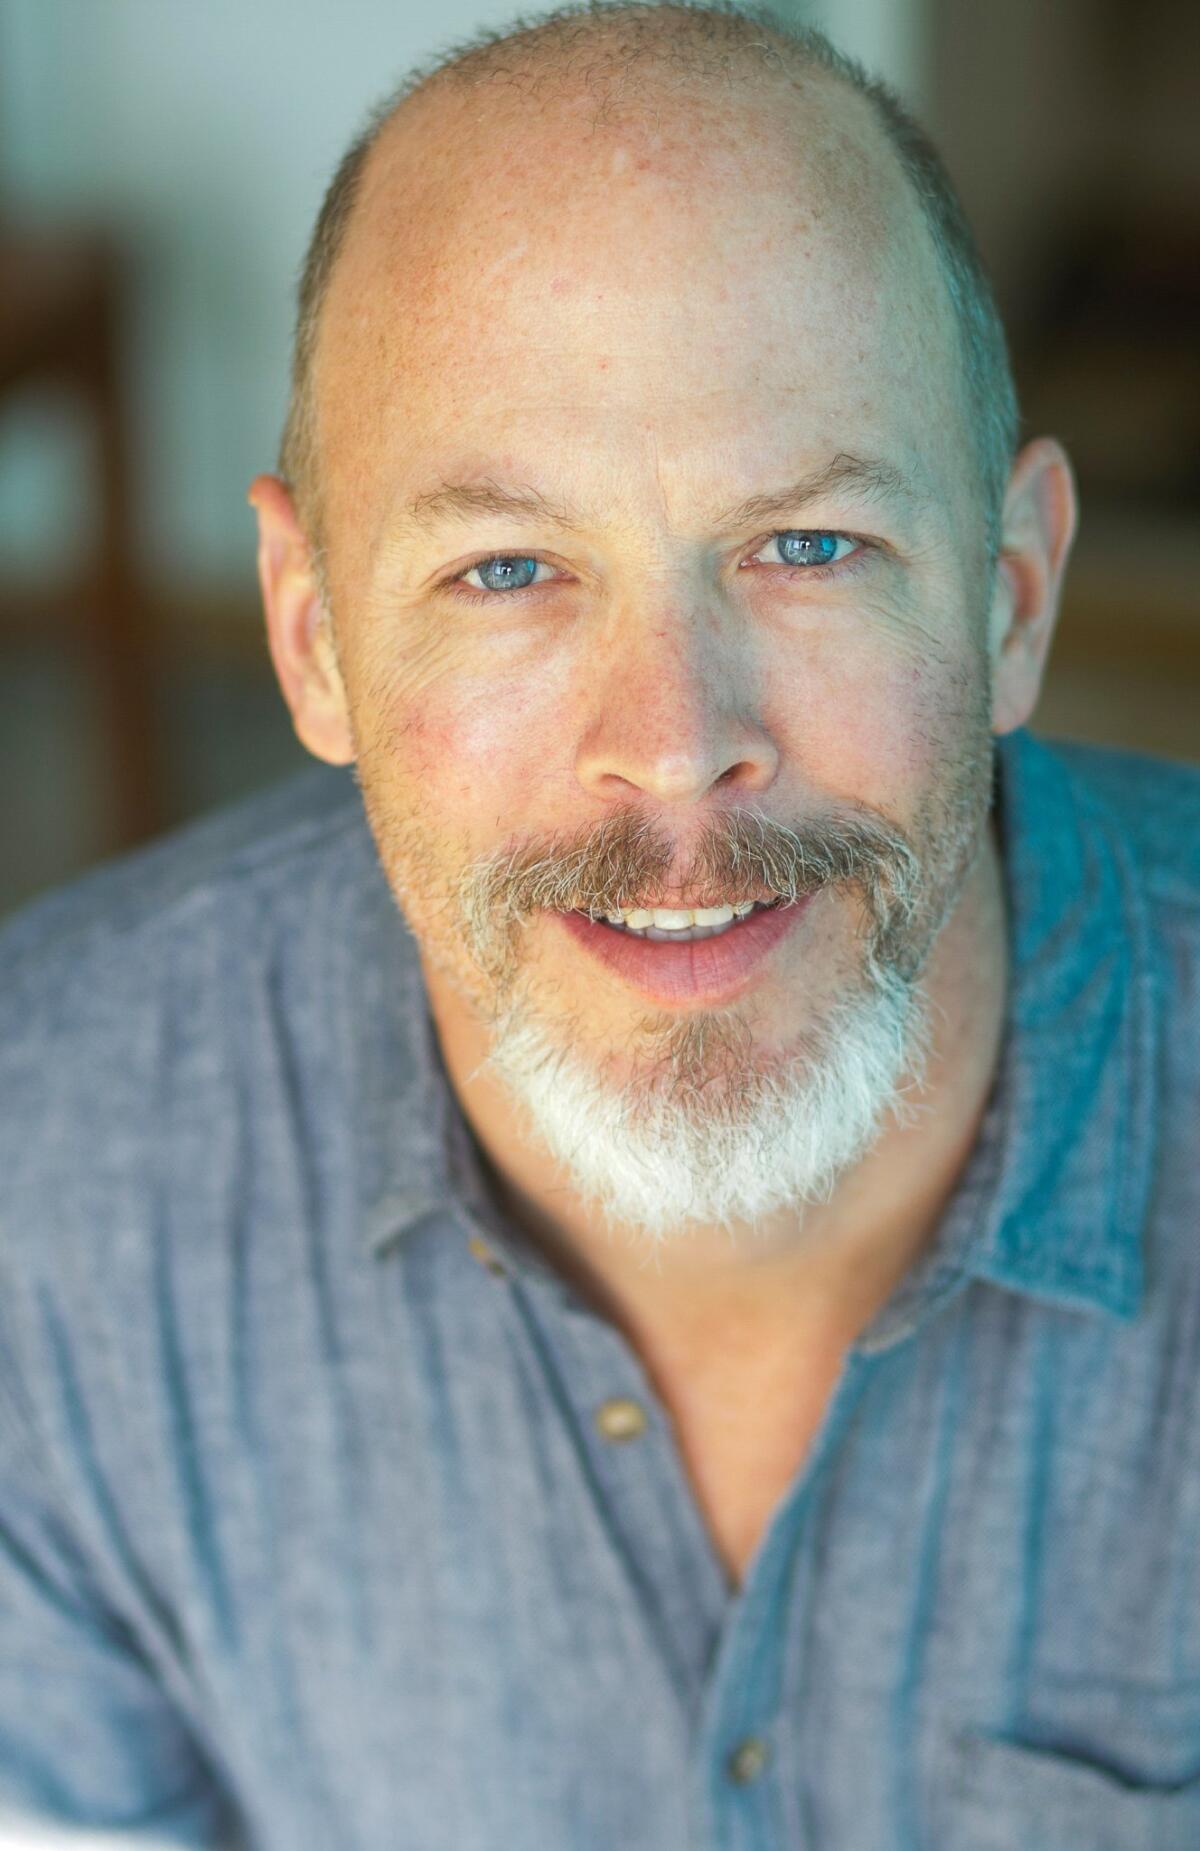 Actor/playwright Mike Sears will collaborate with Lisa Berger on "Ancient," a newly commissioned 2020 Without Walls virtual theater piece for the La Jolla Playhouse.